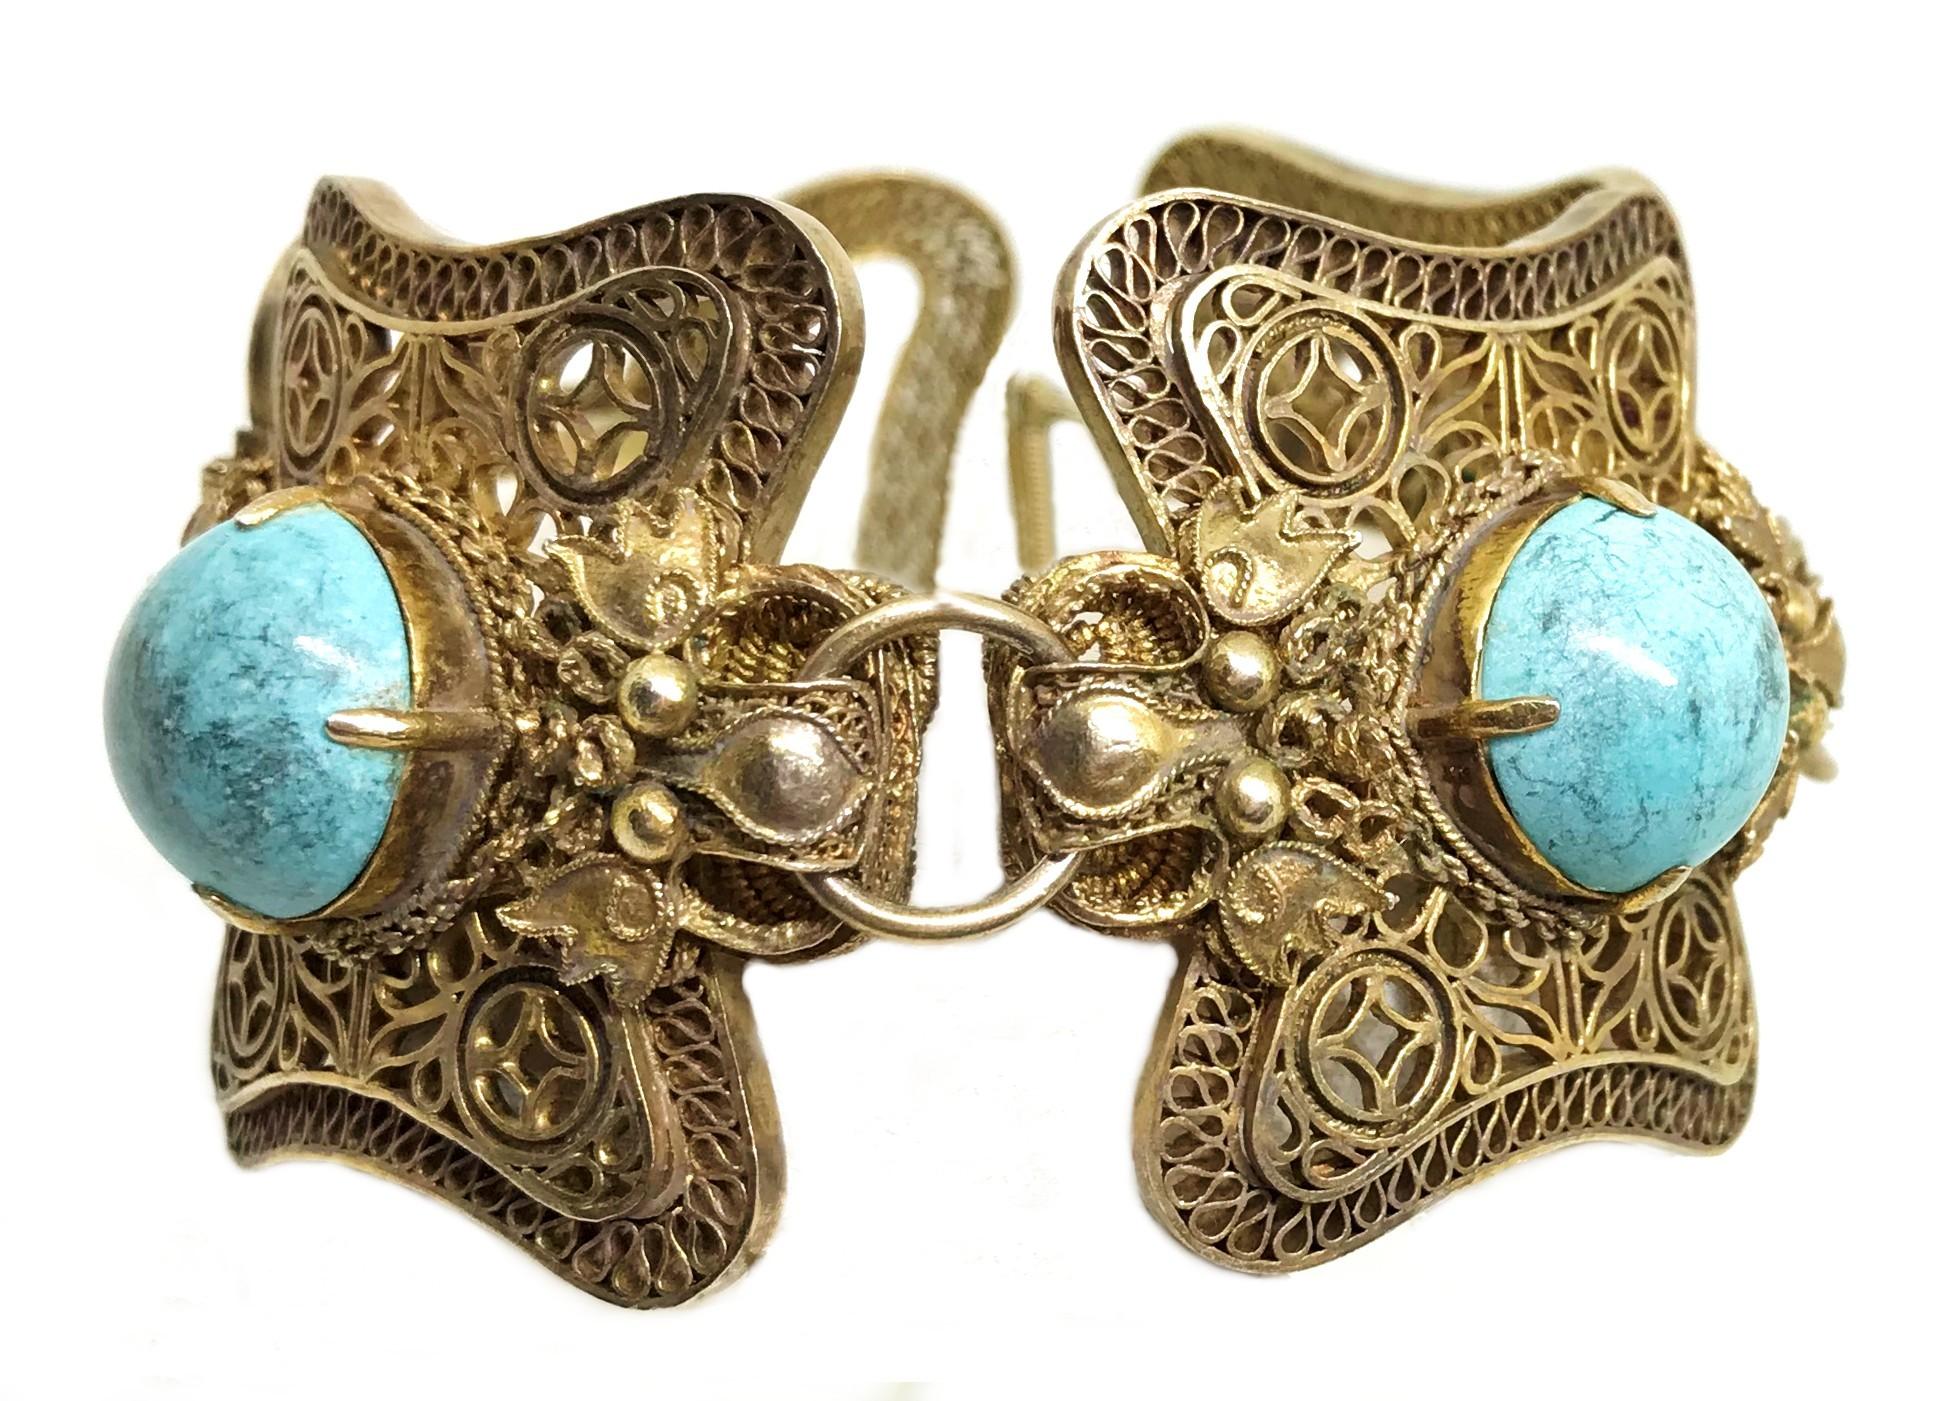 Circa 1960 Chinese gold-plated sterling silver ornate filigree link bracelet, prong set with round turquoise cabochons and embellished with dragon heads between each link.   Safety chain attached.  The condition is very good with minimal wear. 